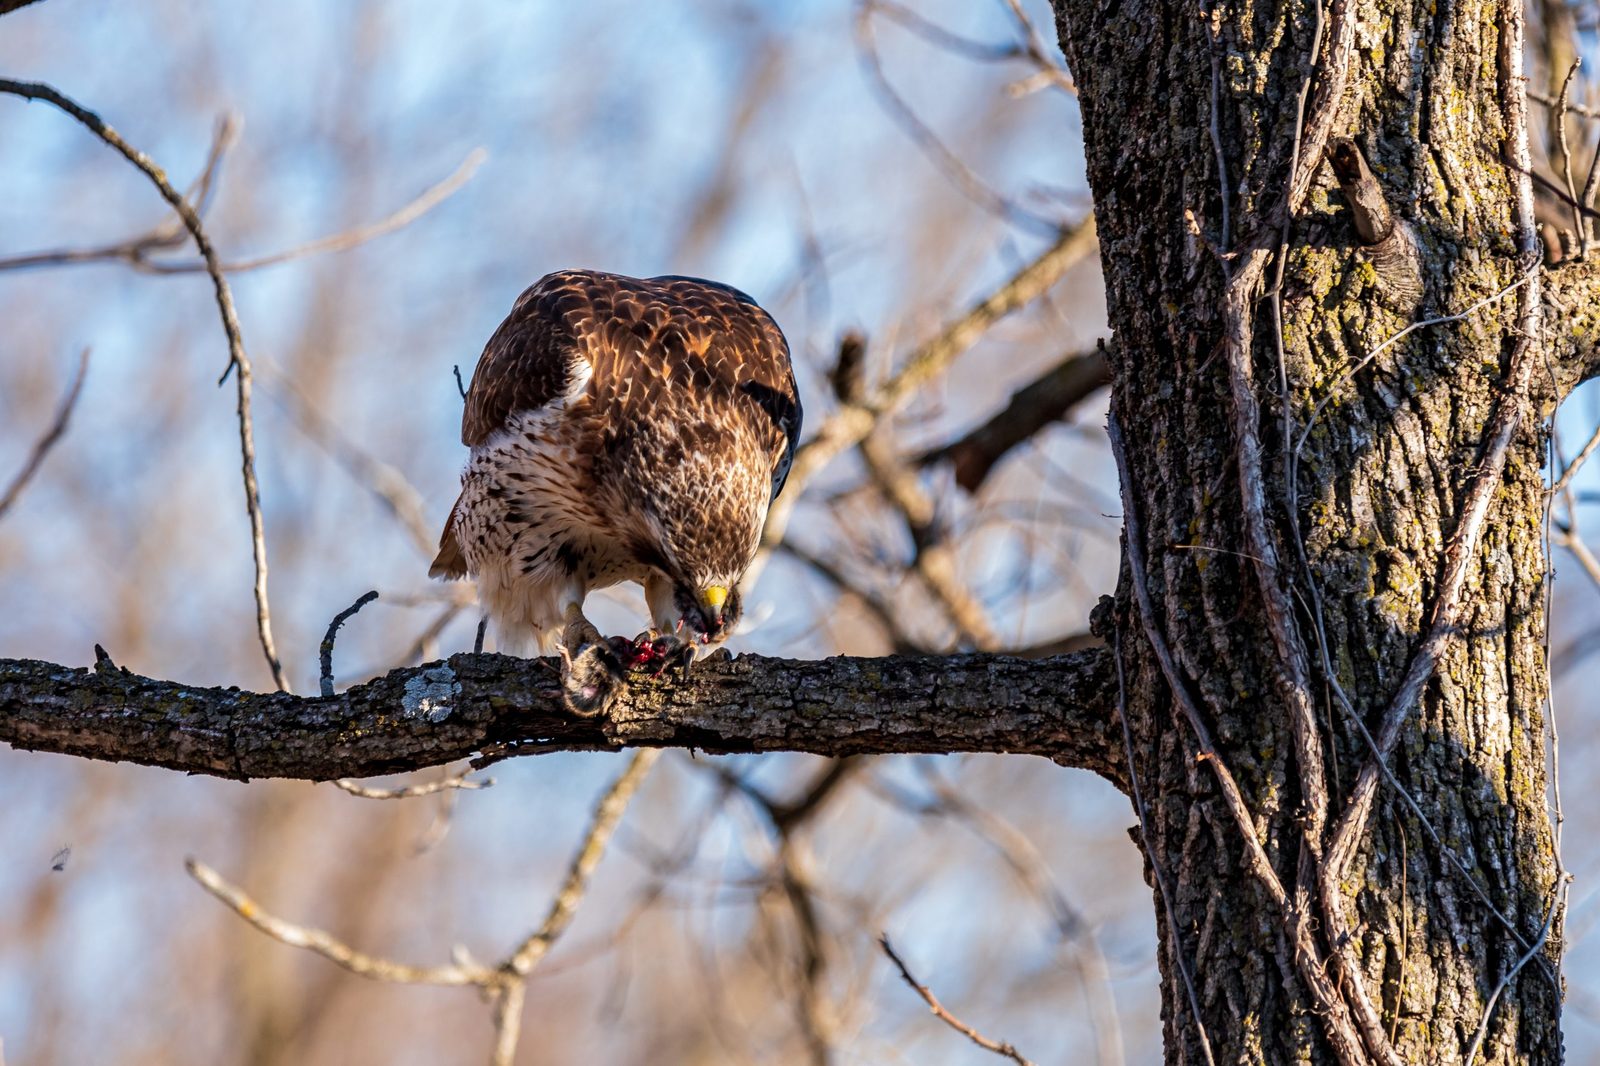 A red-tailed hawk feeds on a rodent in a tree.